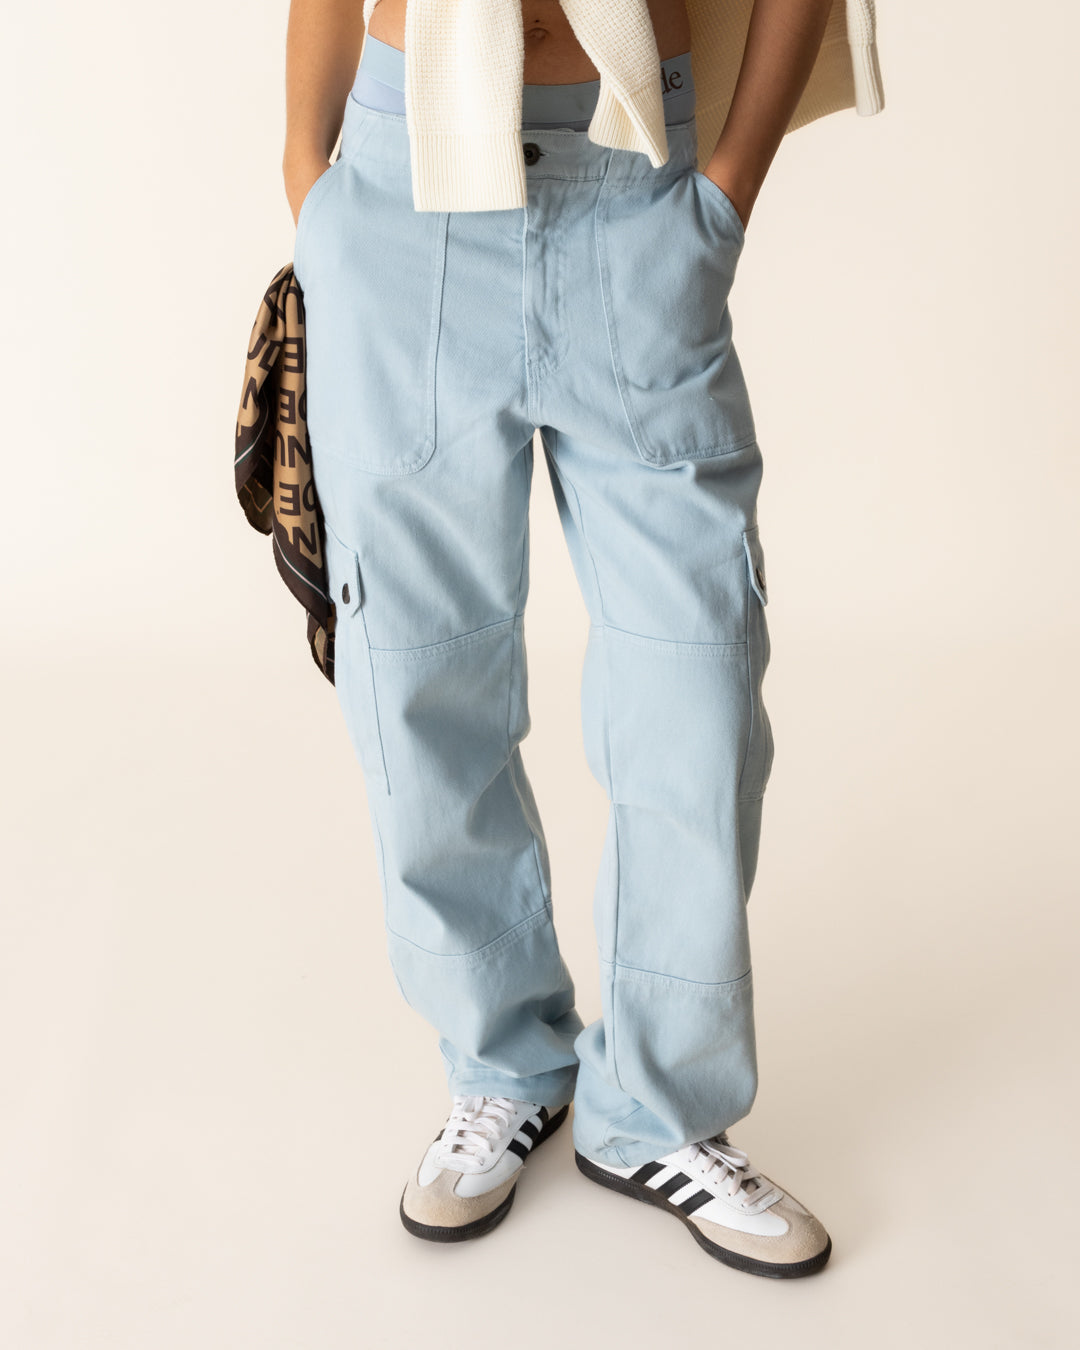 CARGO PANTS BABY BLUE – NUDE PROJECT